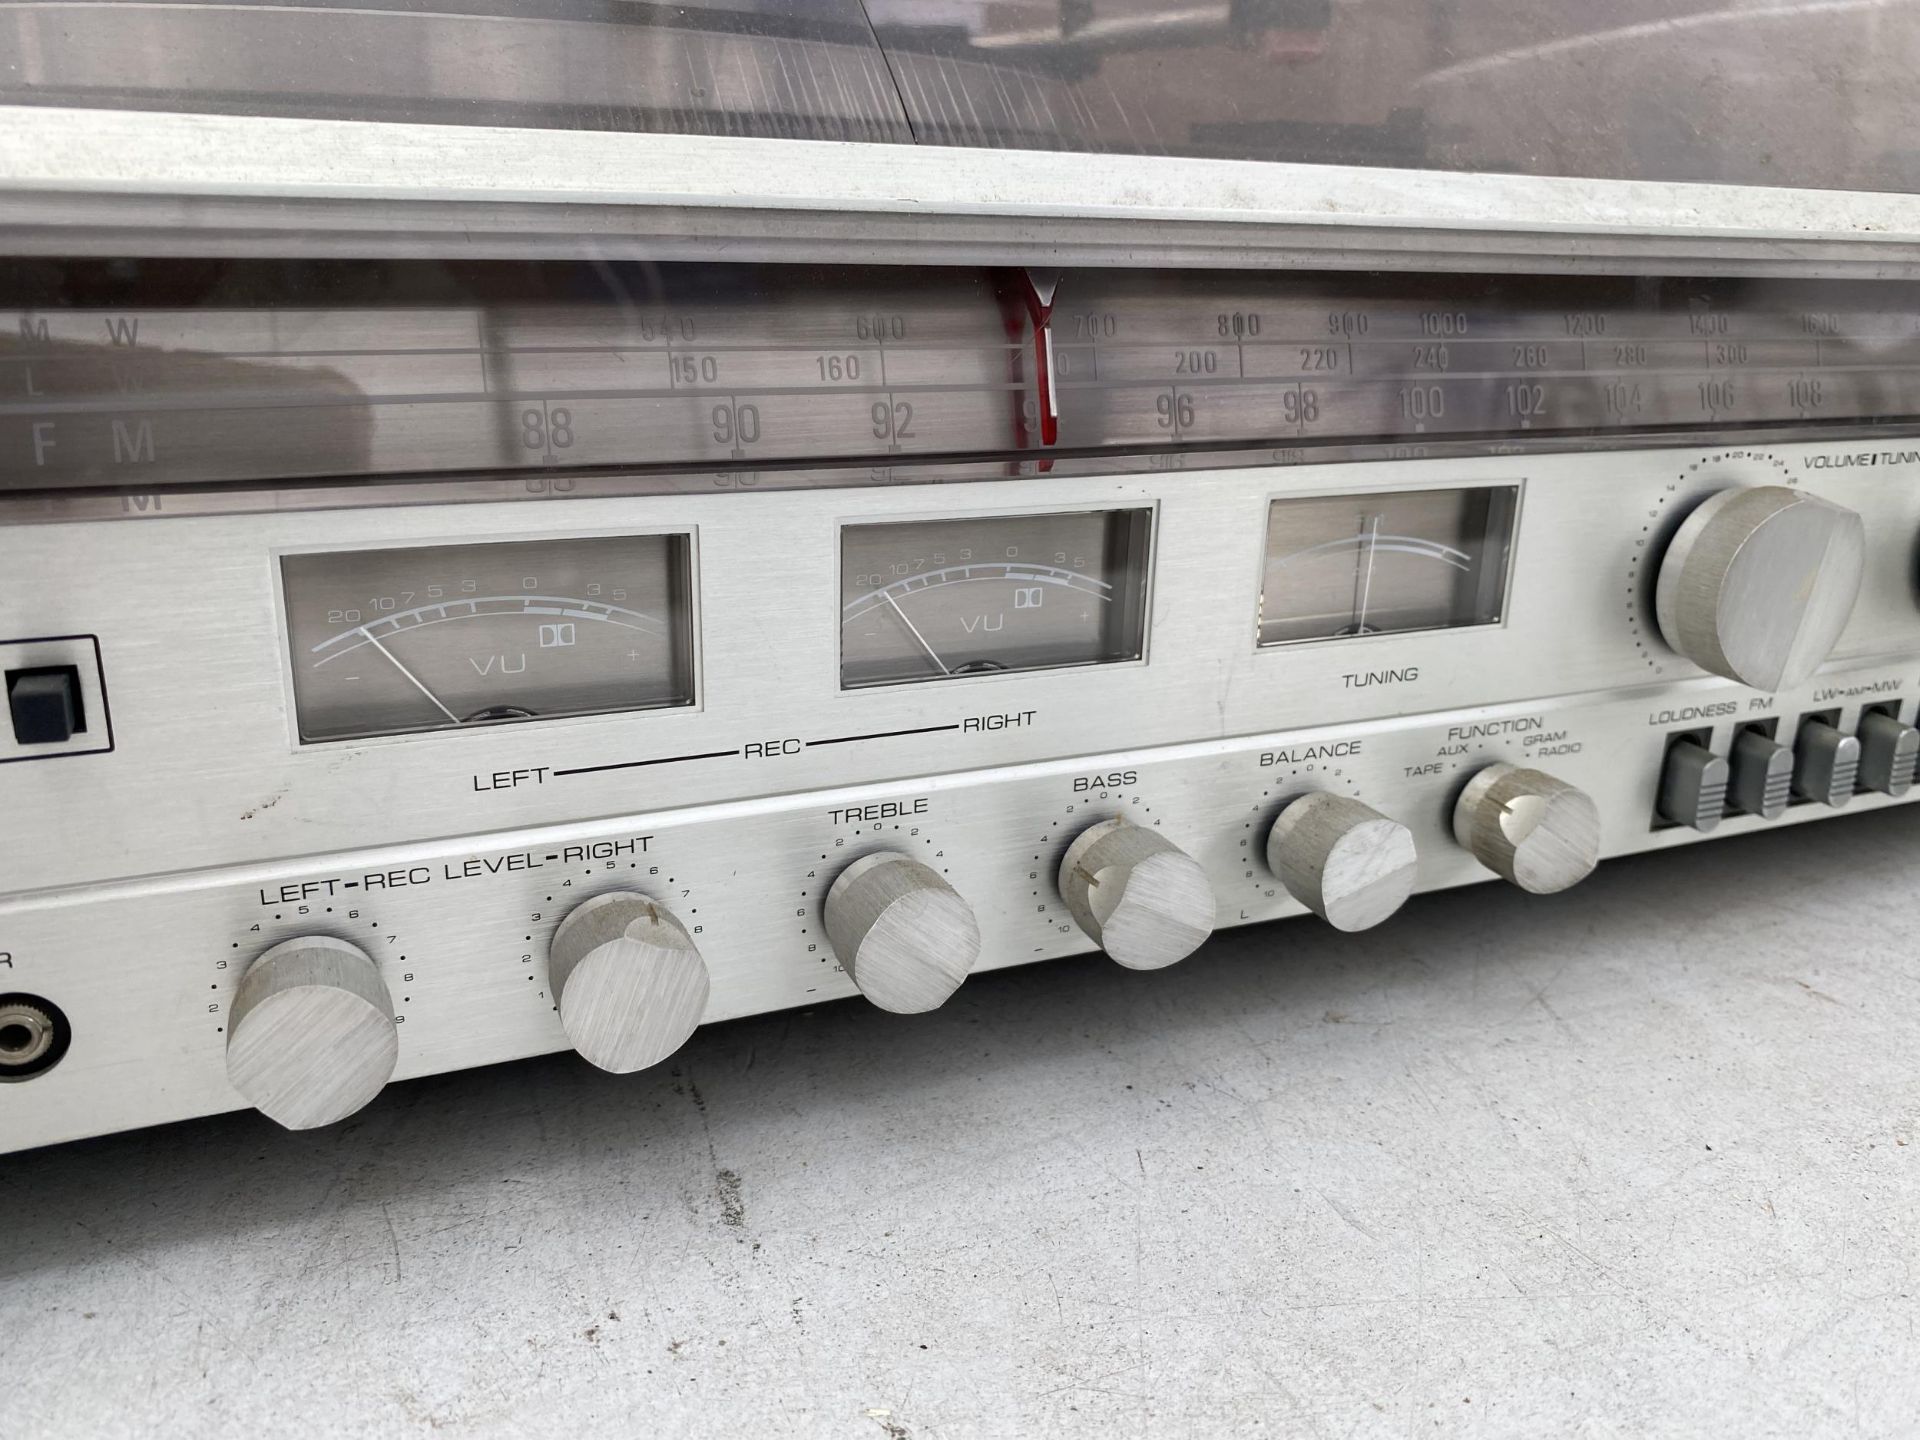 A CASED SAKAI RECORD DECK WITH TUNER AND TAPE DECK - Image 3 of 3